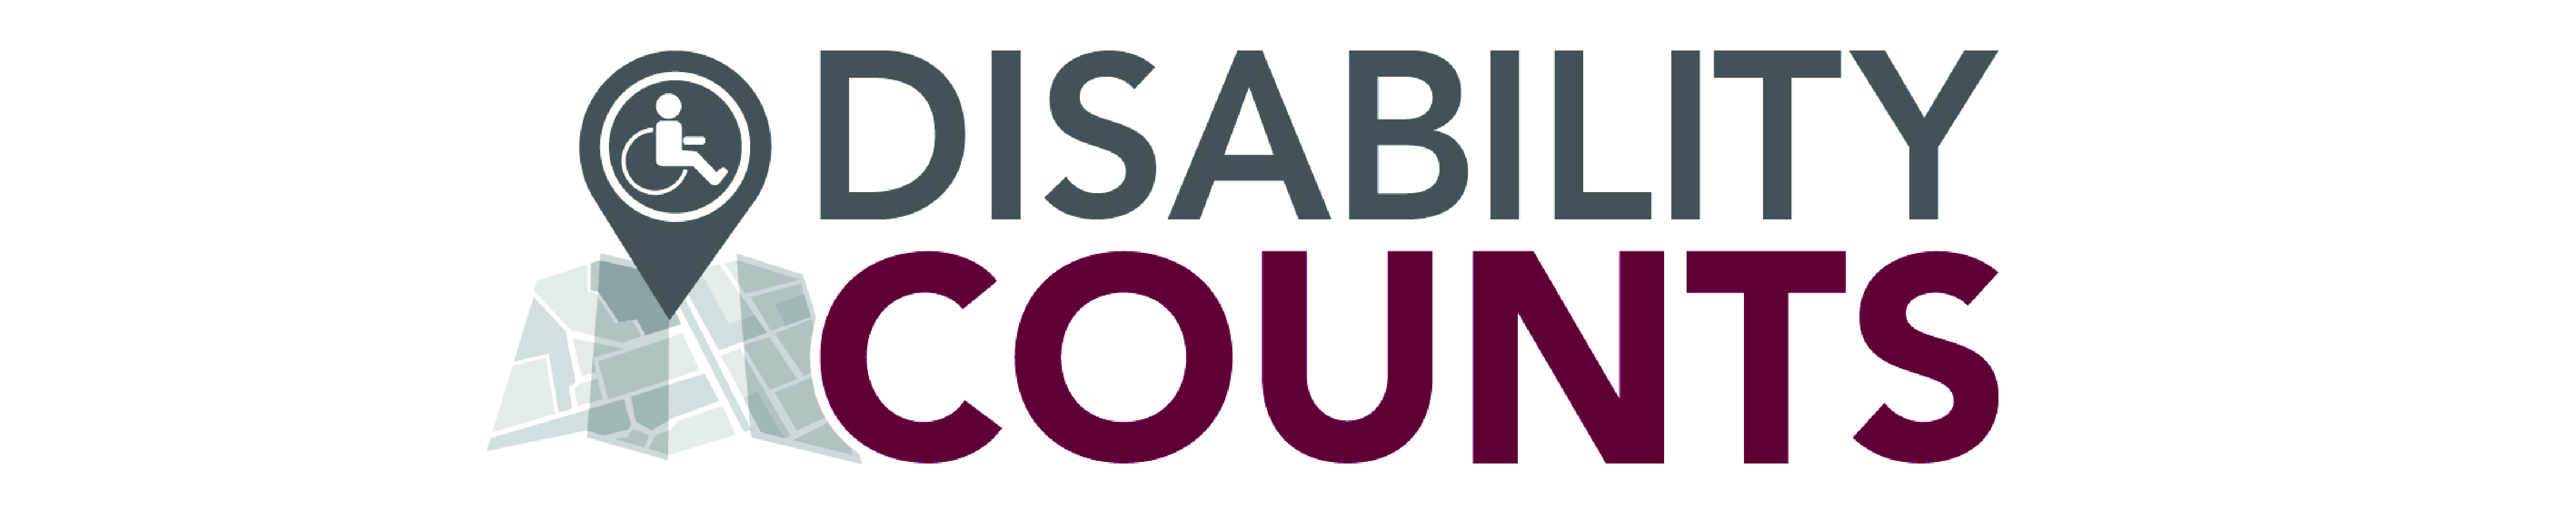 Disability Counts Logo